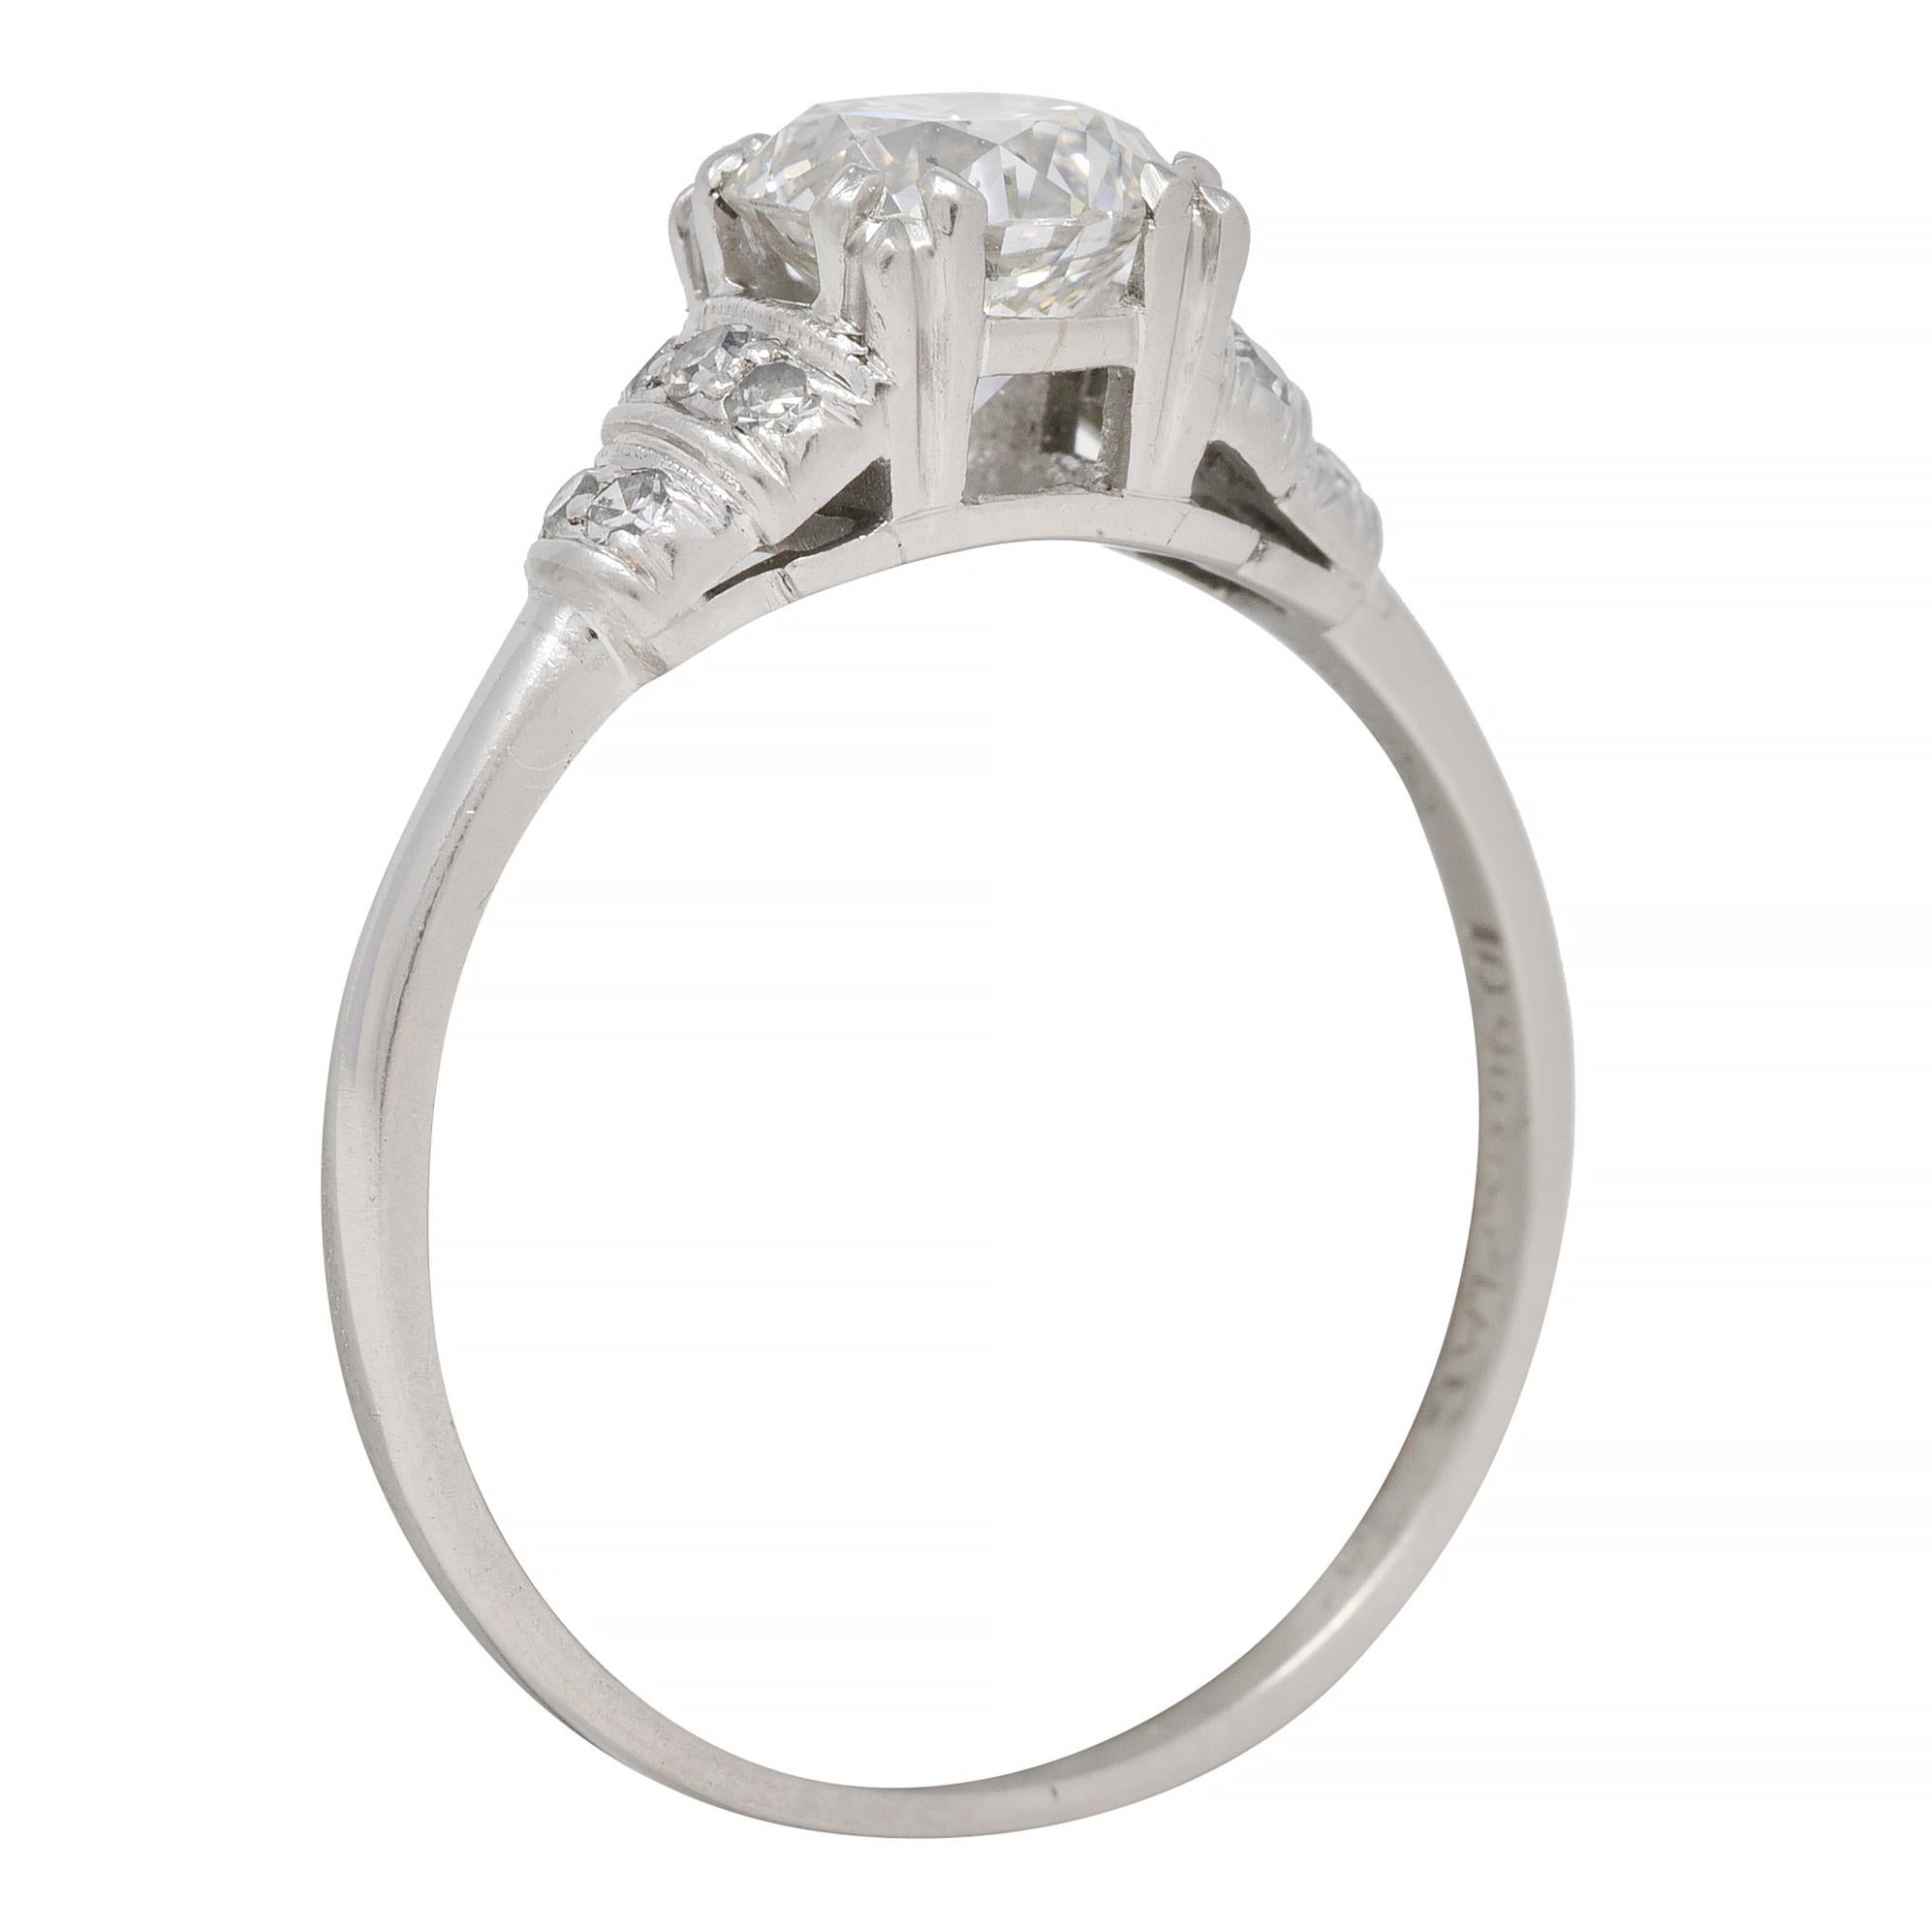 Centering an old European cut diamond weighing approximately 1.08 carats - G color with SI2 clarity
Set in a basket with tri-split prongs and flanked by cathedral shoulders
Accented by tiered rows of bead set single cut diamonds
Weighing